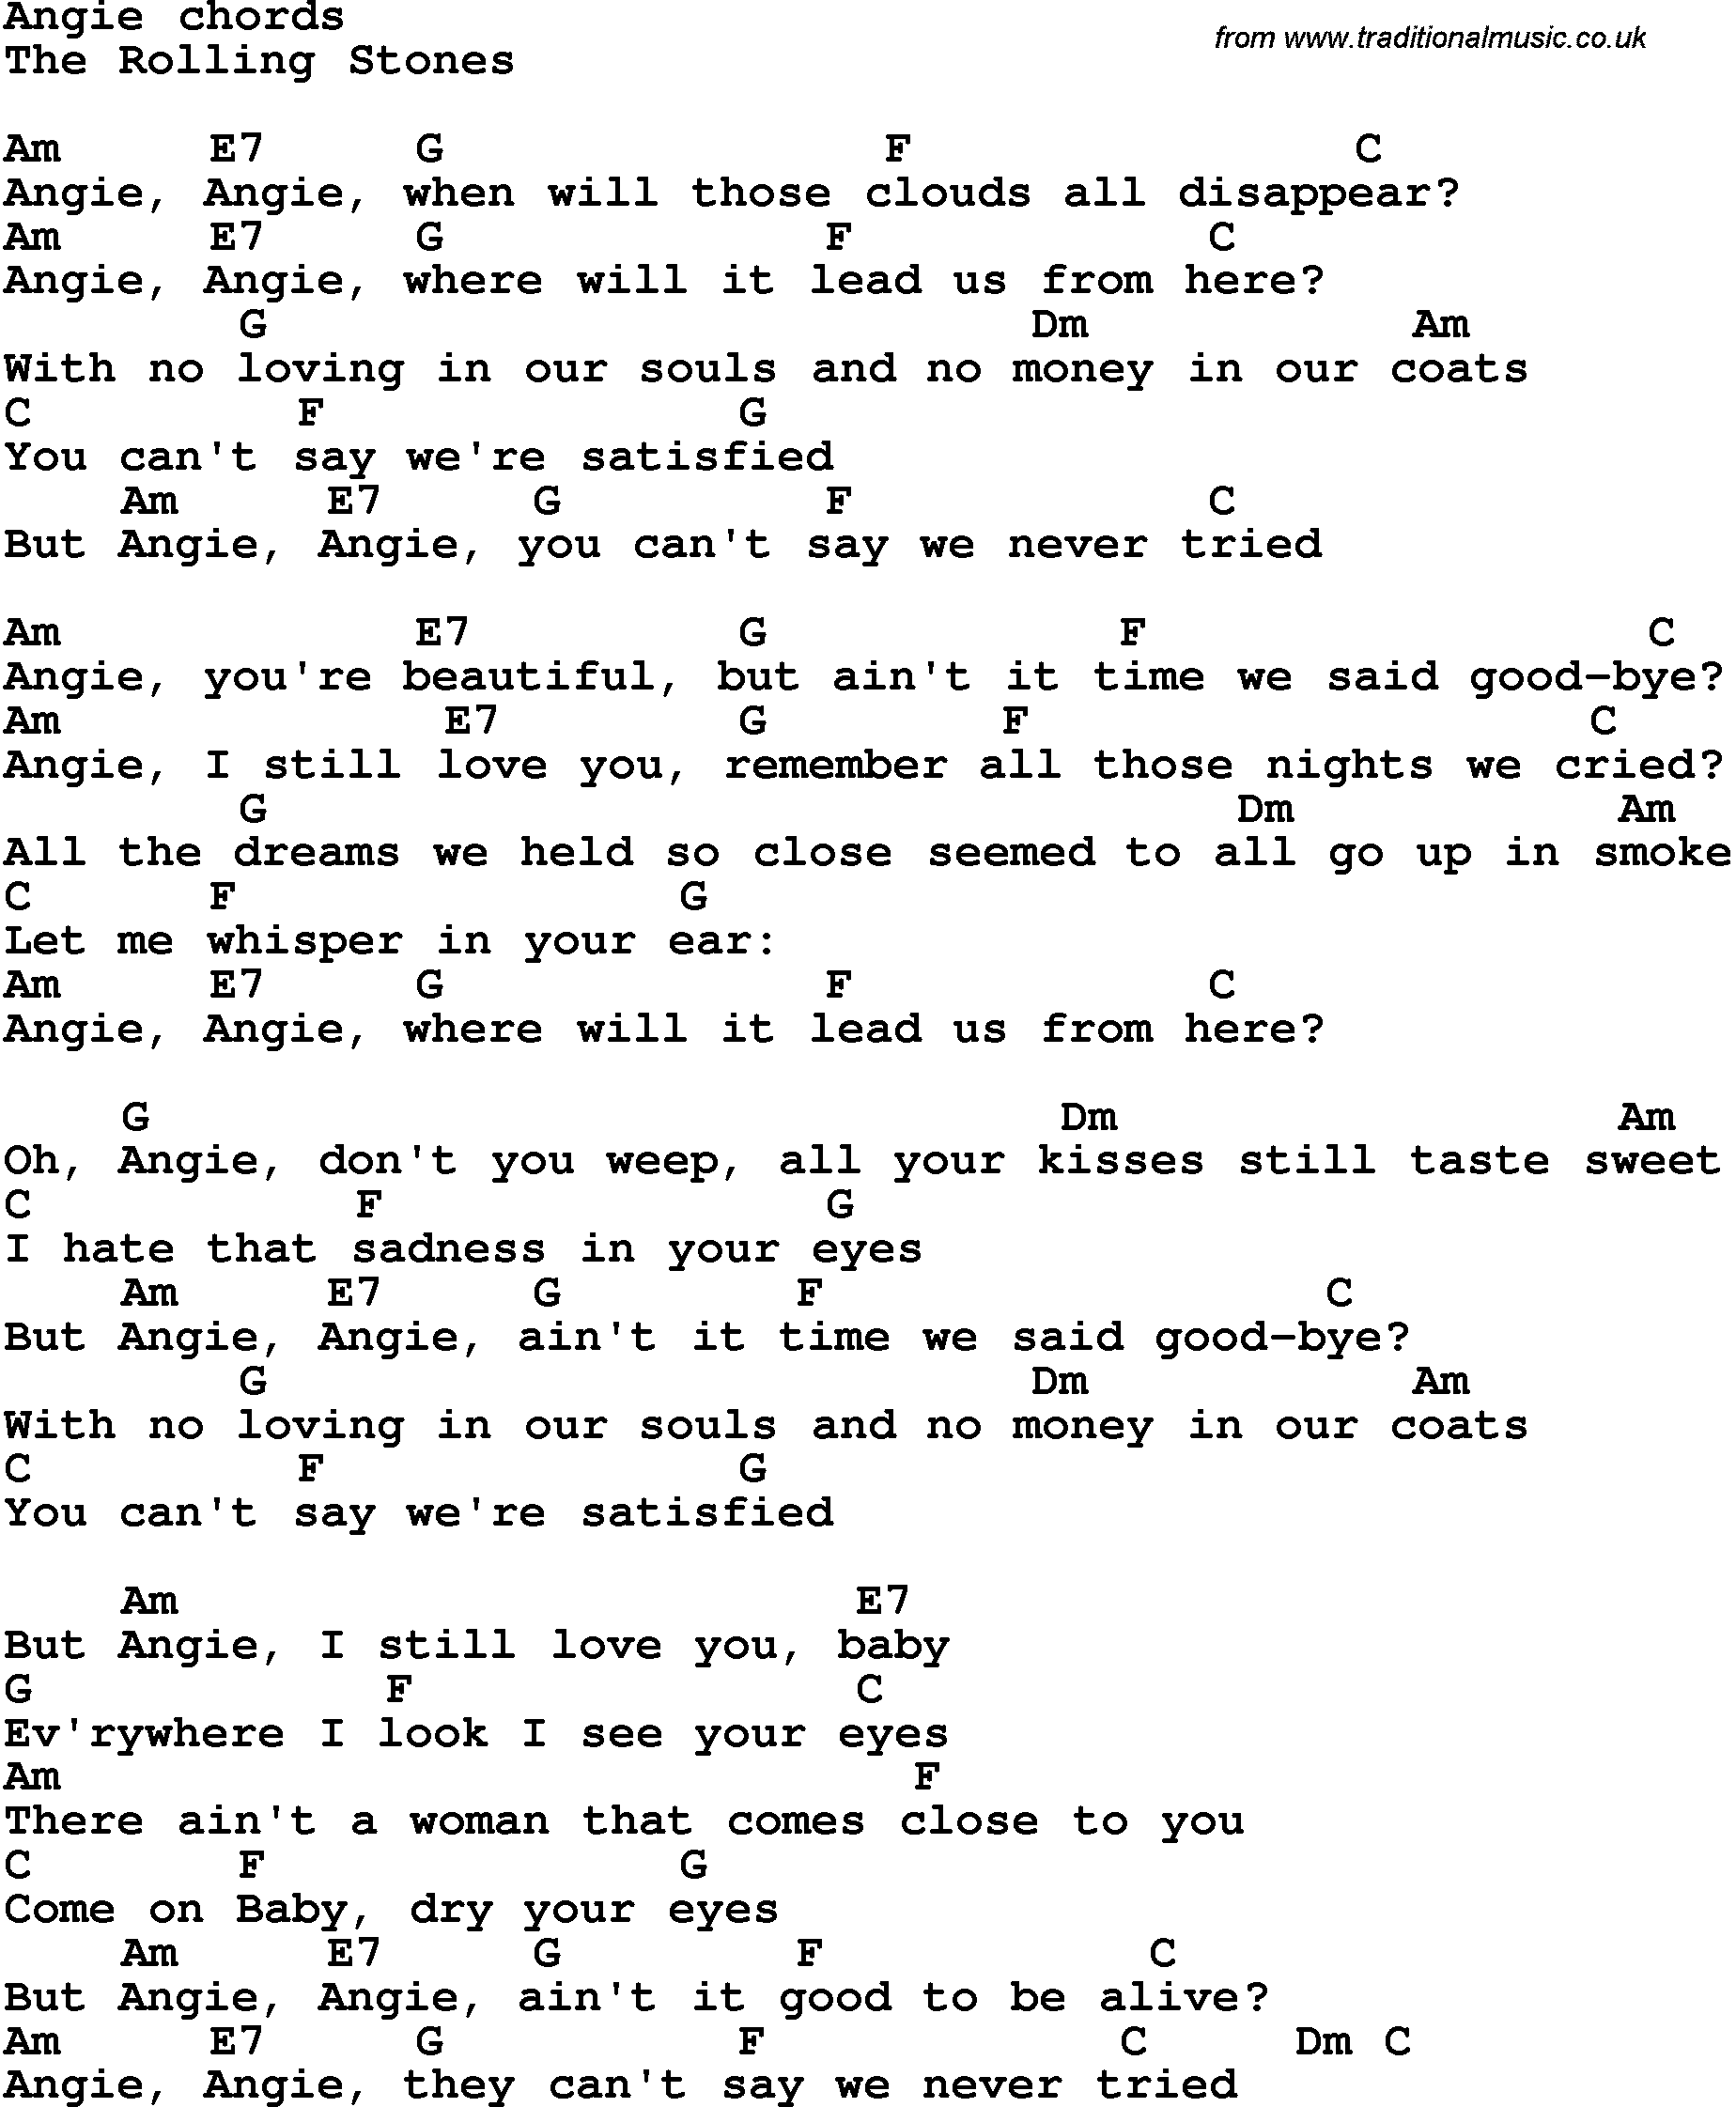 Song Lyrics with guitar chords for Angie - The Rolling Stones